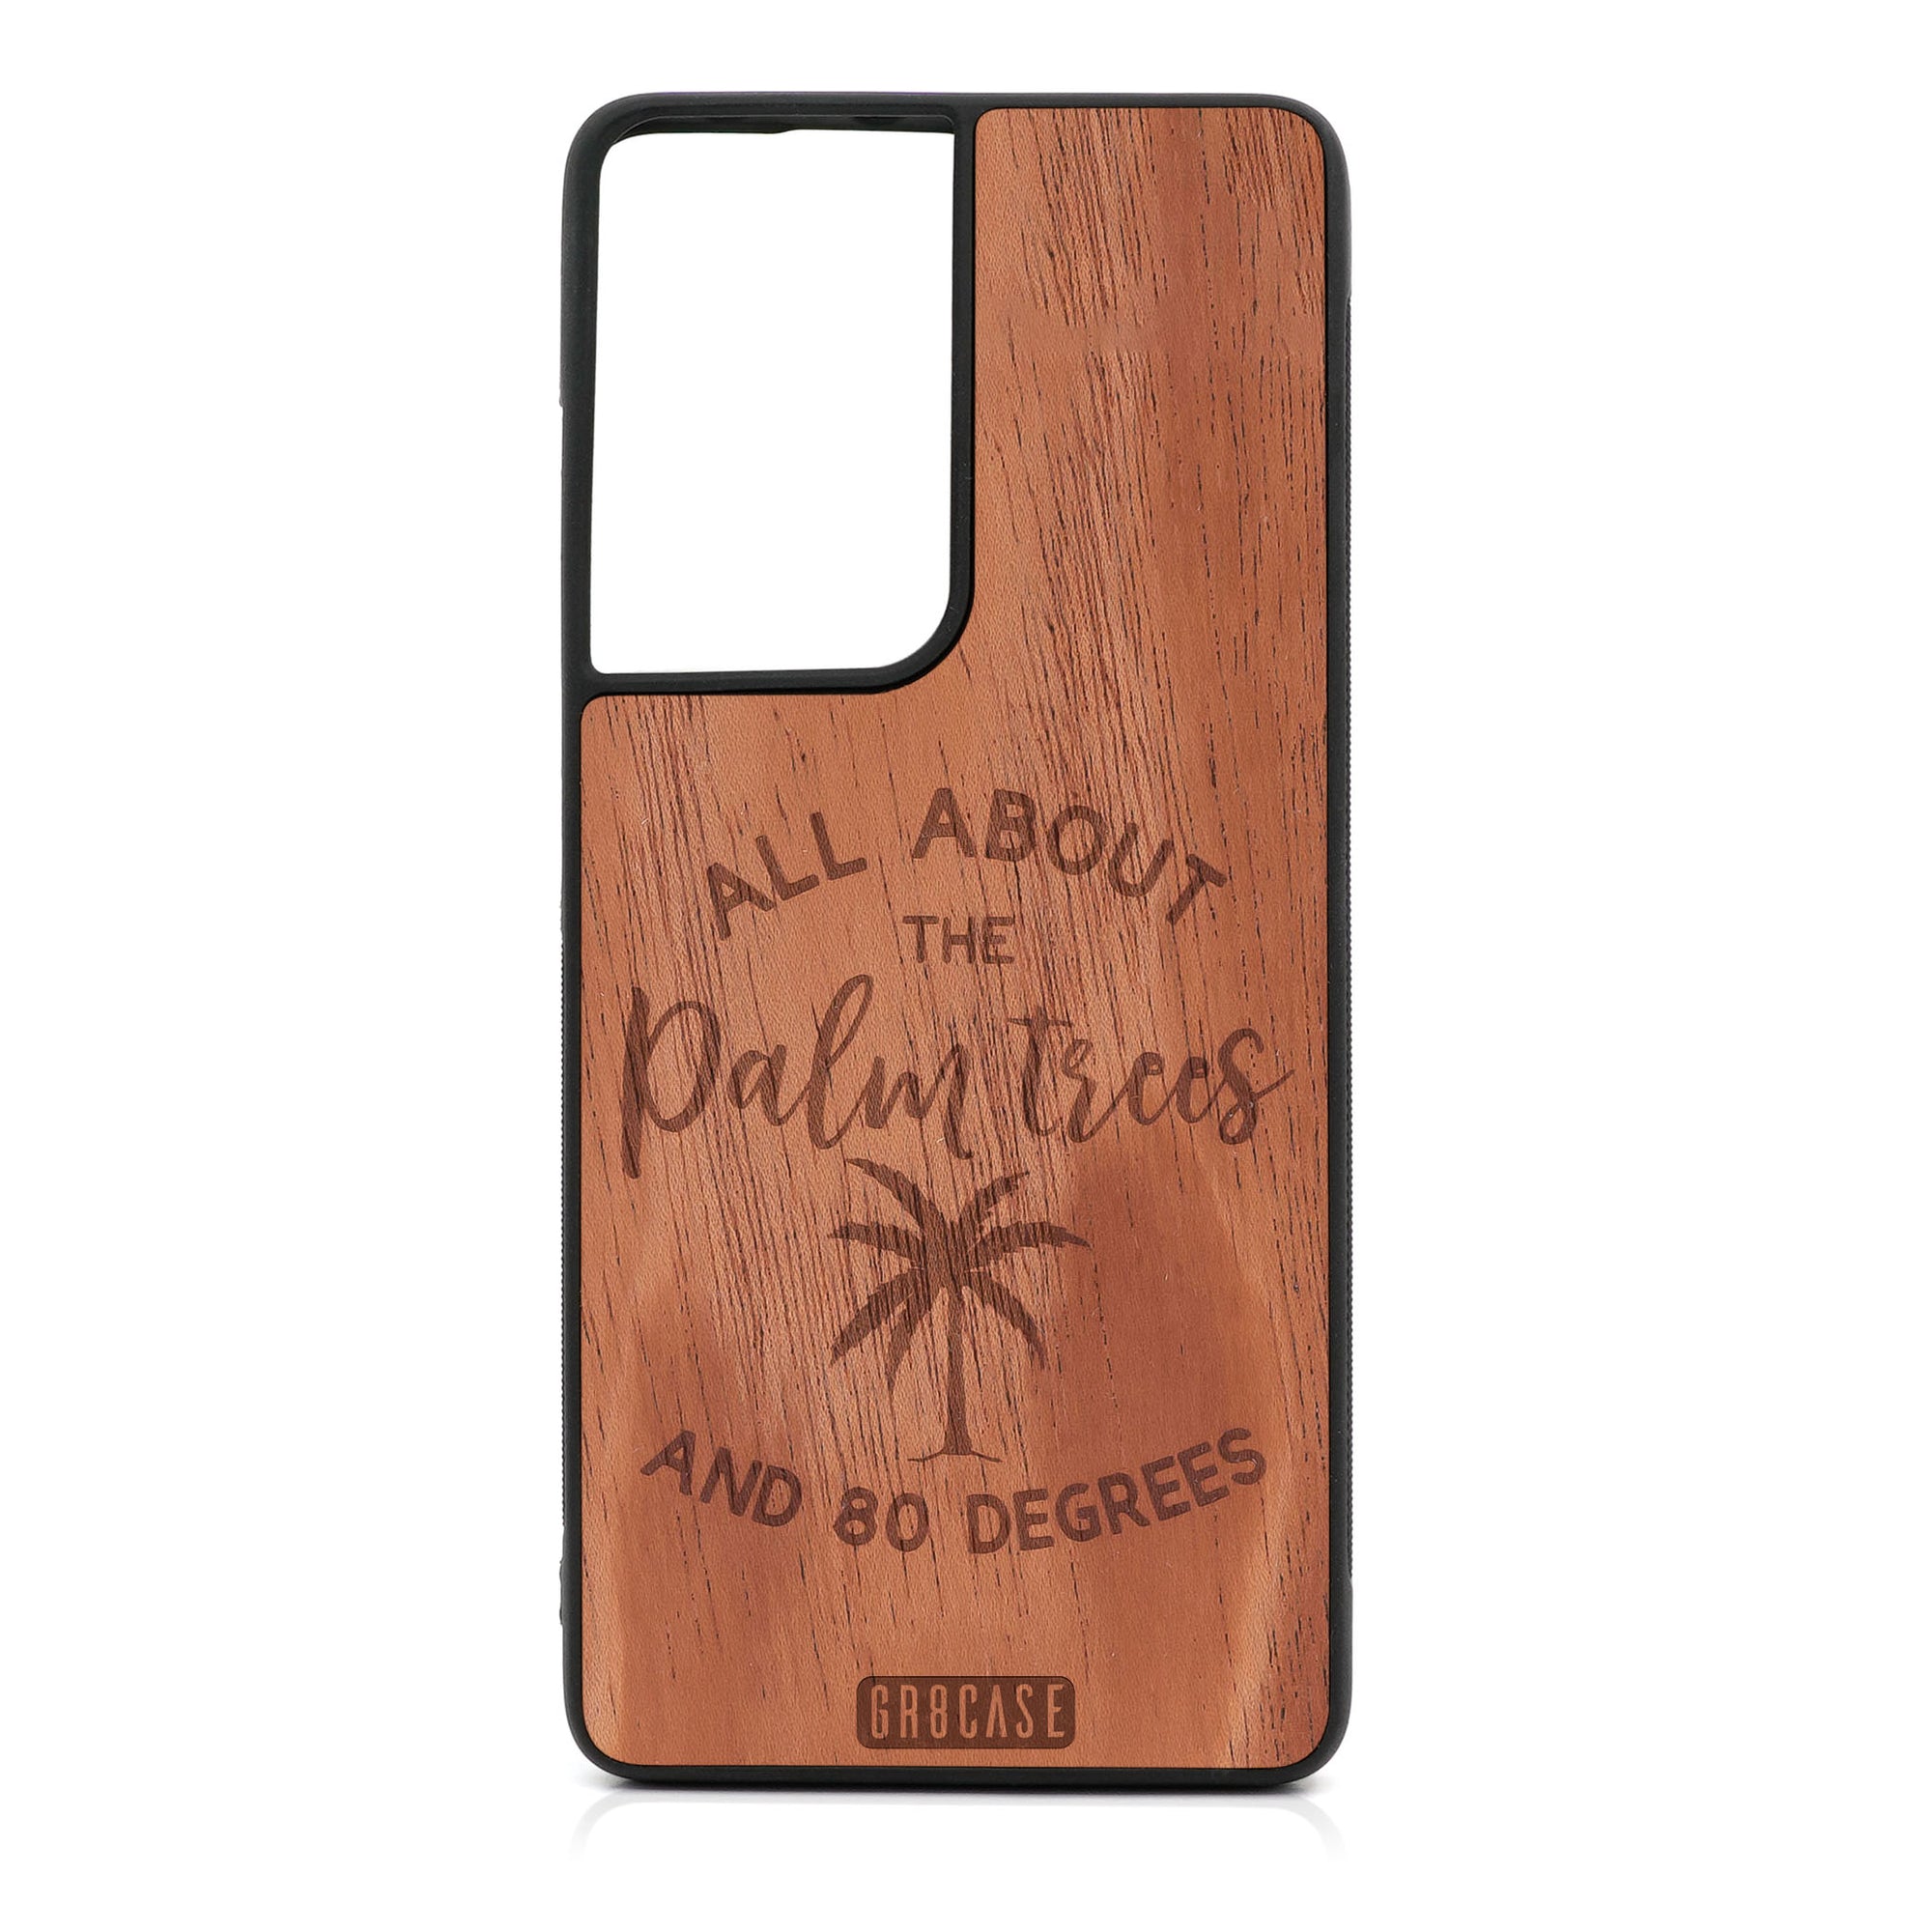 All About The Palm Trees And 80 Degree Design Wood Case For Samsung Galaxy S21 Ultra 5G